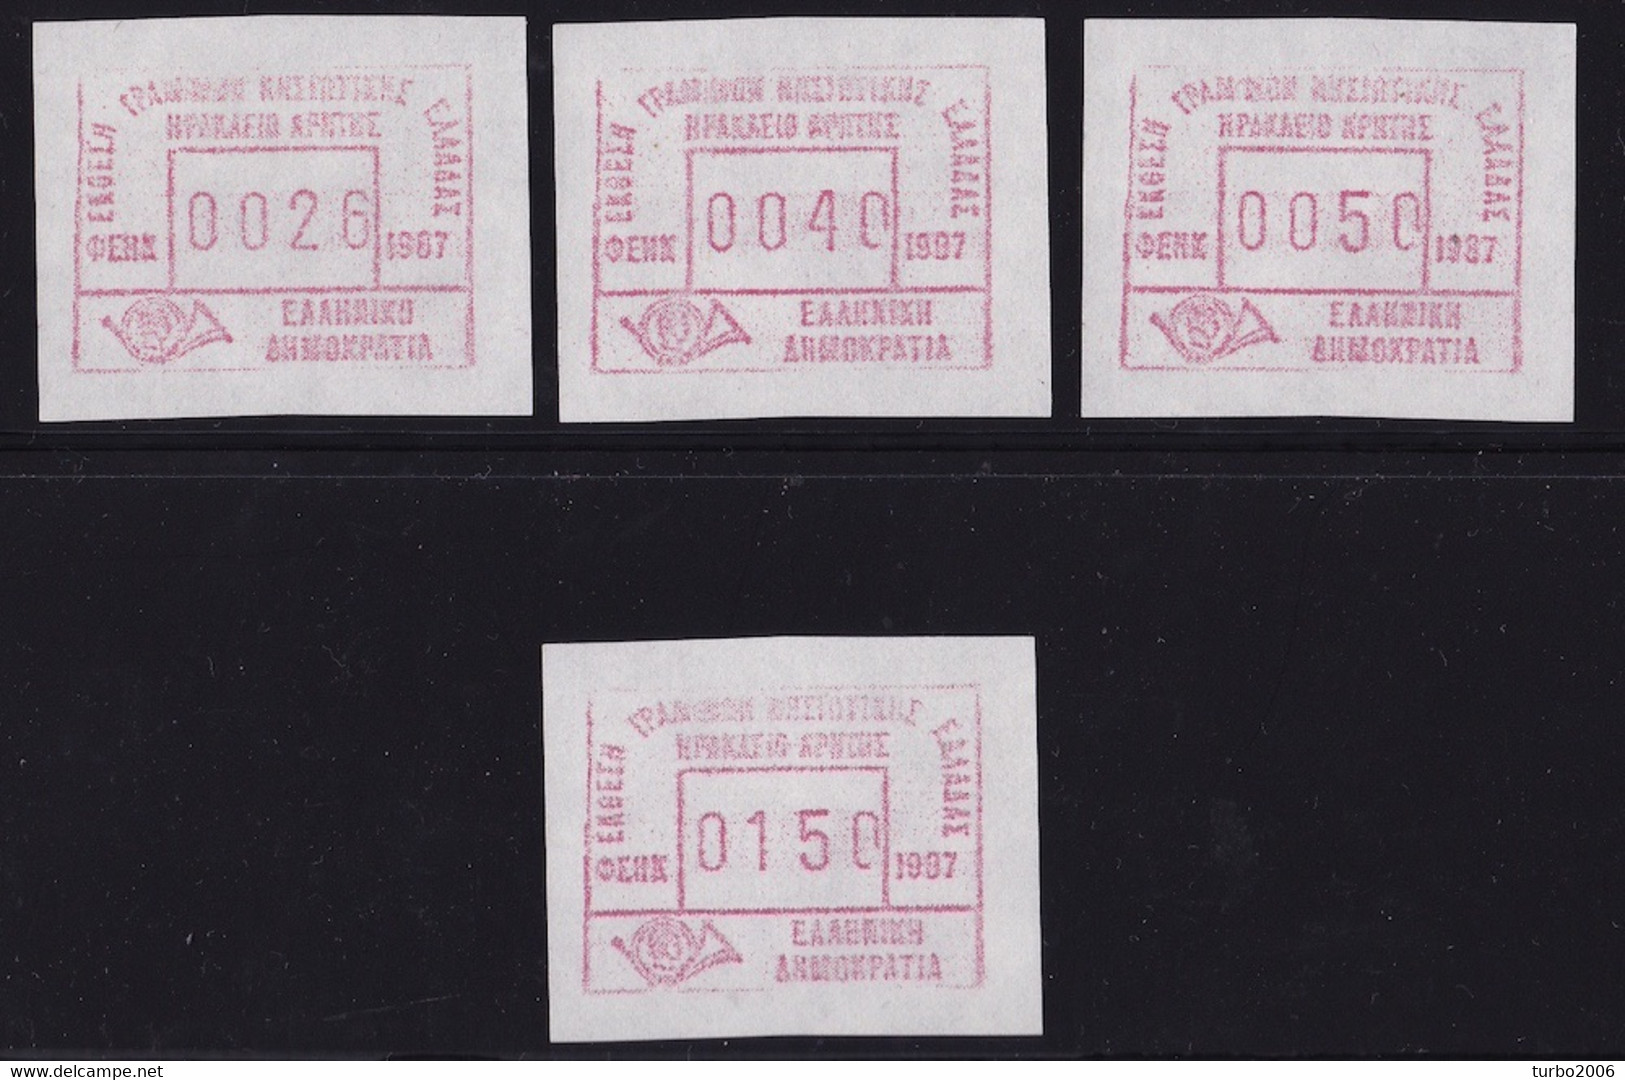 GREECE 1987 FRAMA Stamps For Philatelic Exhabition Of Heraklion Exhabition Set Of 26-40-50 Dr + 150 D MNH Hellas M 14 I - Automaatzegels [ATM]